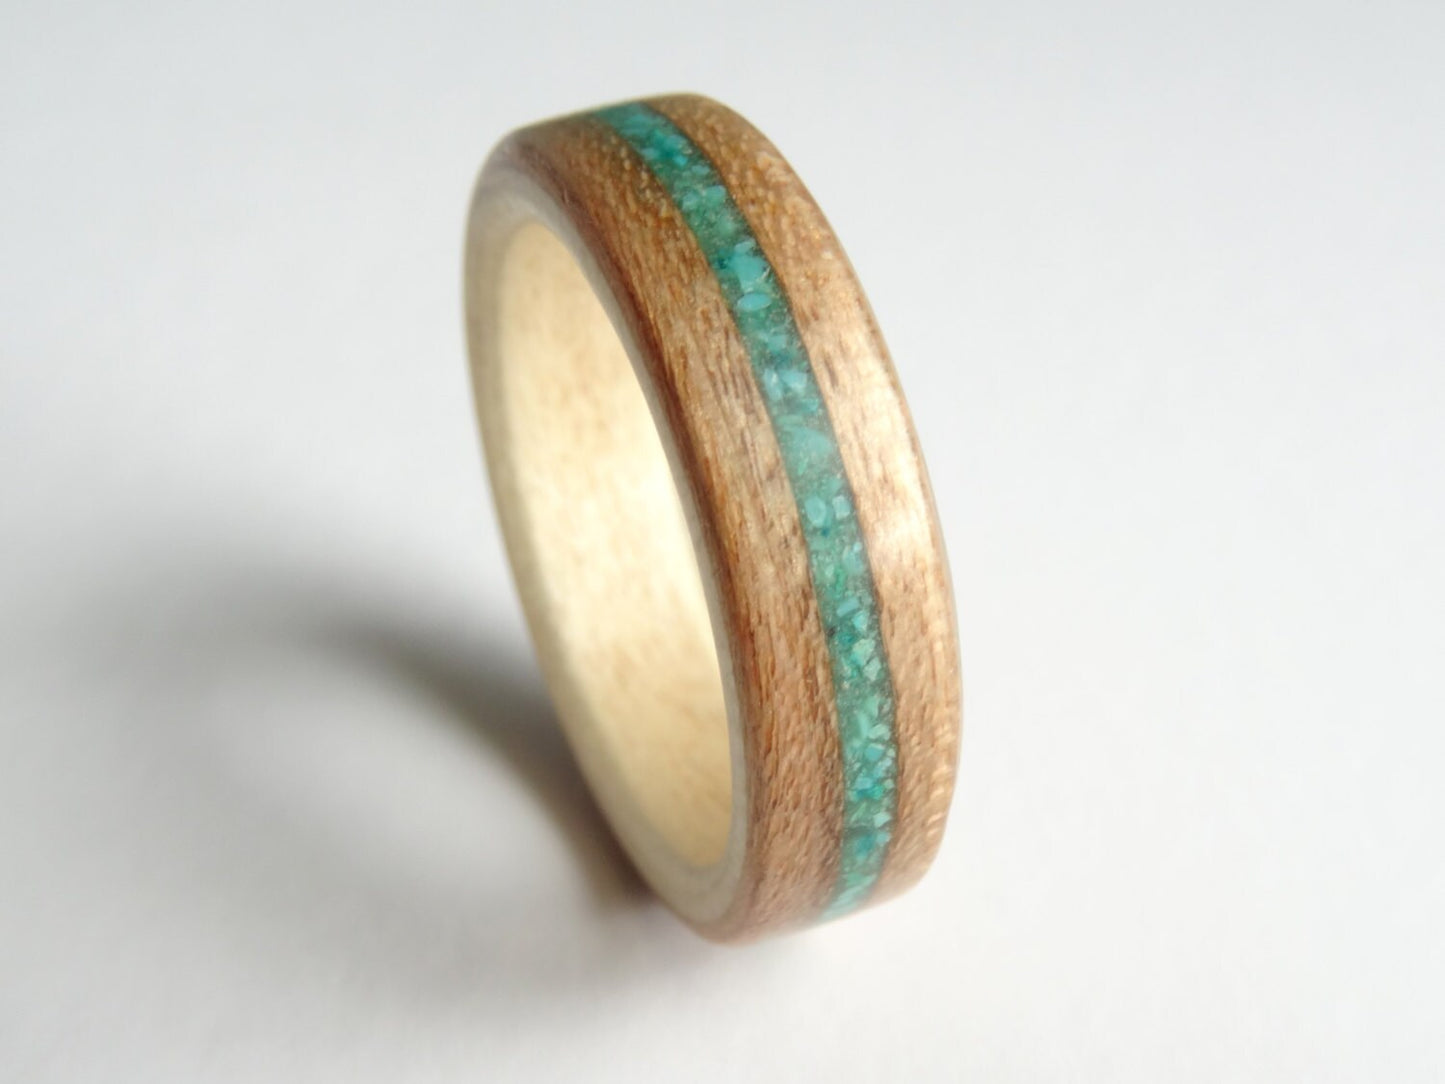 Cherry & Sycamore With Turquoise Bent Wood Ring